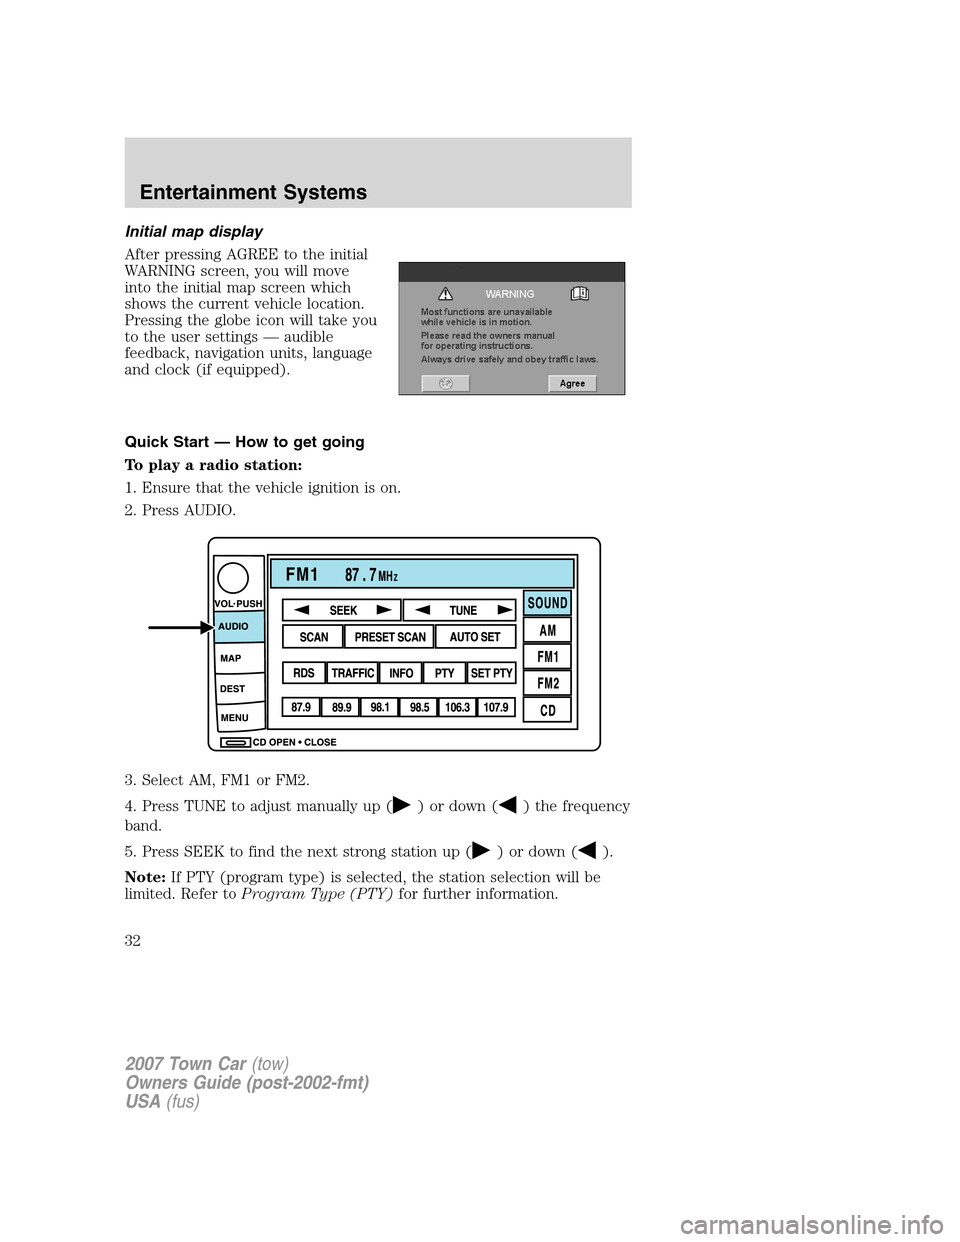 LINCOLN TOWN CAR 2007 User Guide Initial map display
After pressing AGREE to the initial
WARNING screen, you will move
into the initial map screen which
shows the current vehicle location.
Pressing the globe icon will take you
to the